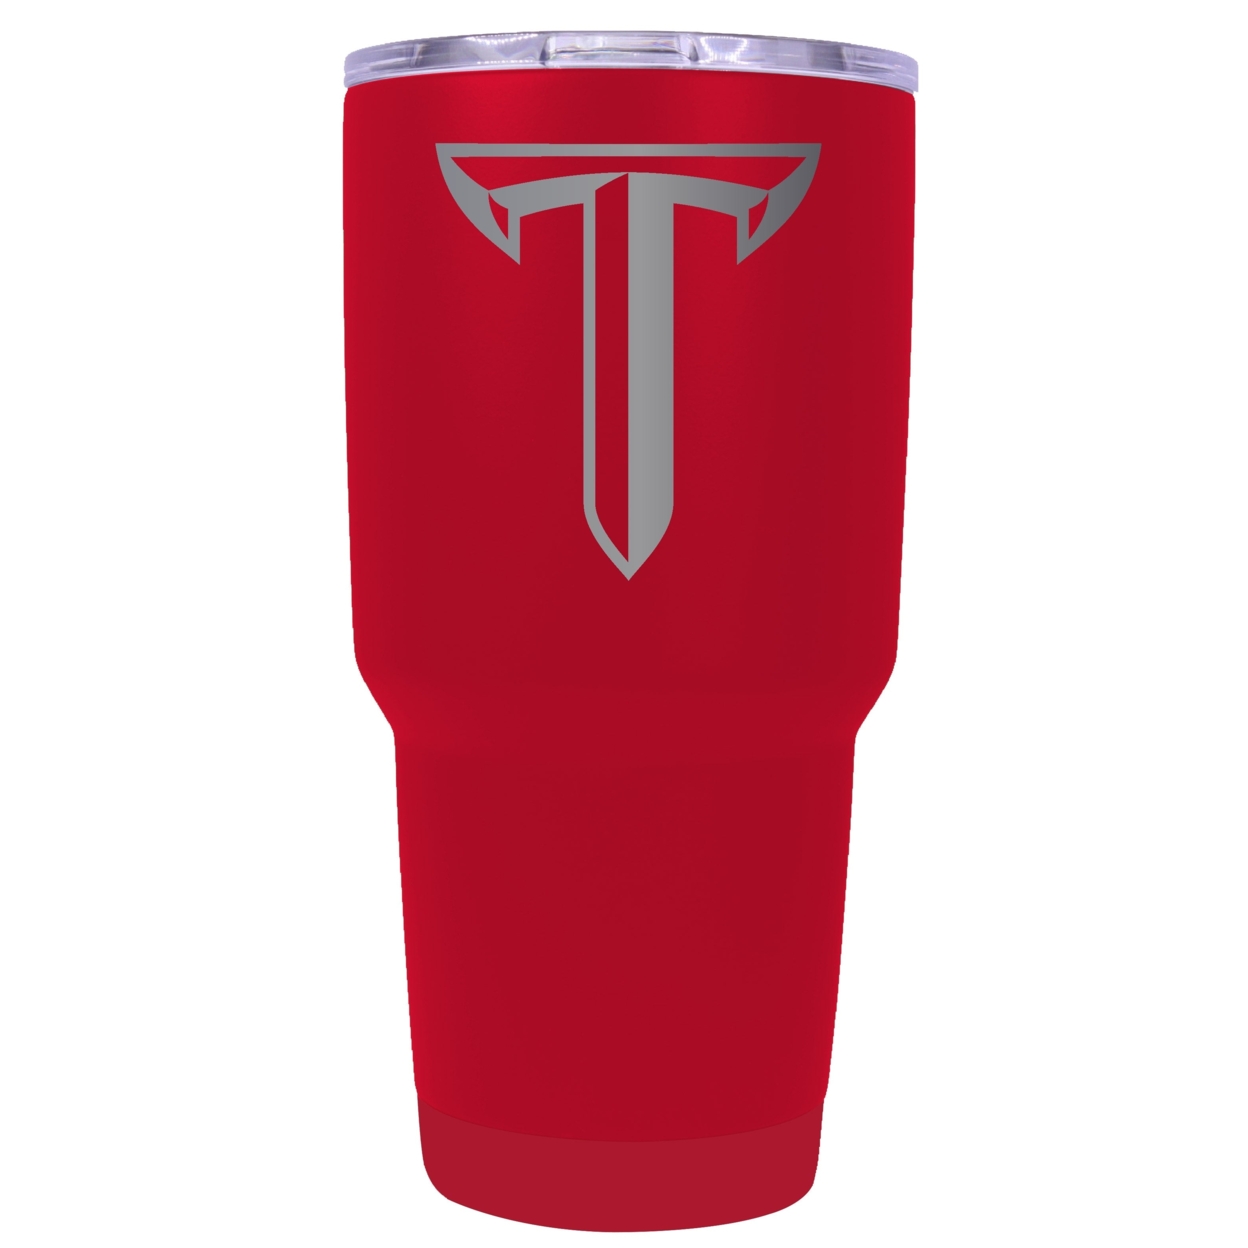 Troy University 24 Oz Laser Engraved Stainless Steel Insulated Tumbler - Choose Your Color. - Red